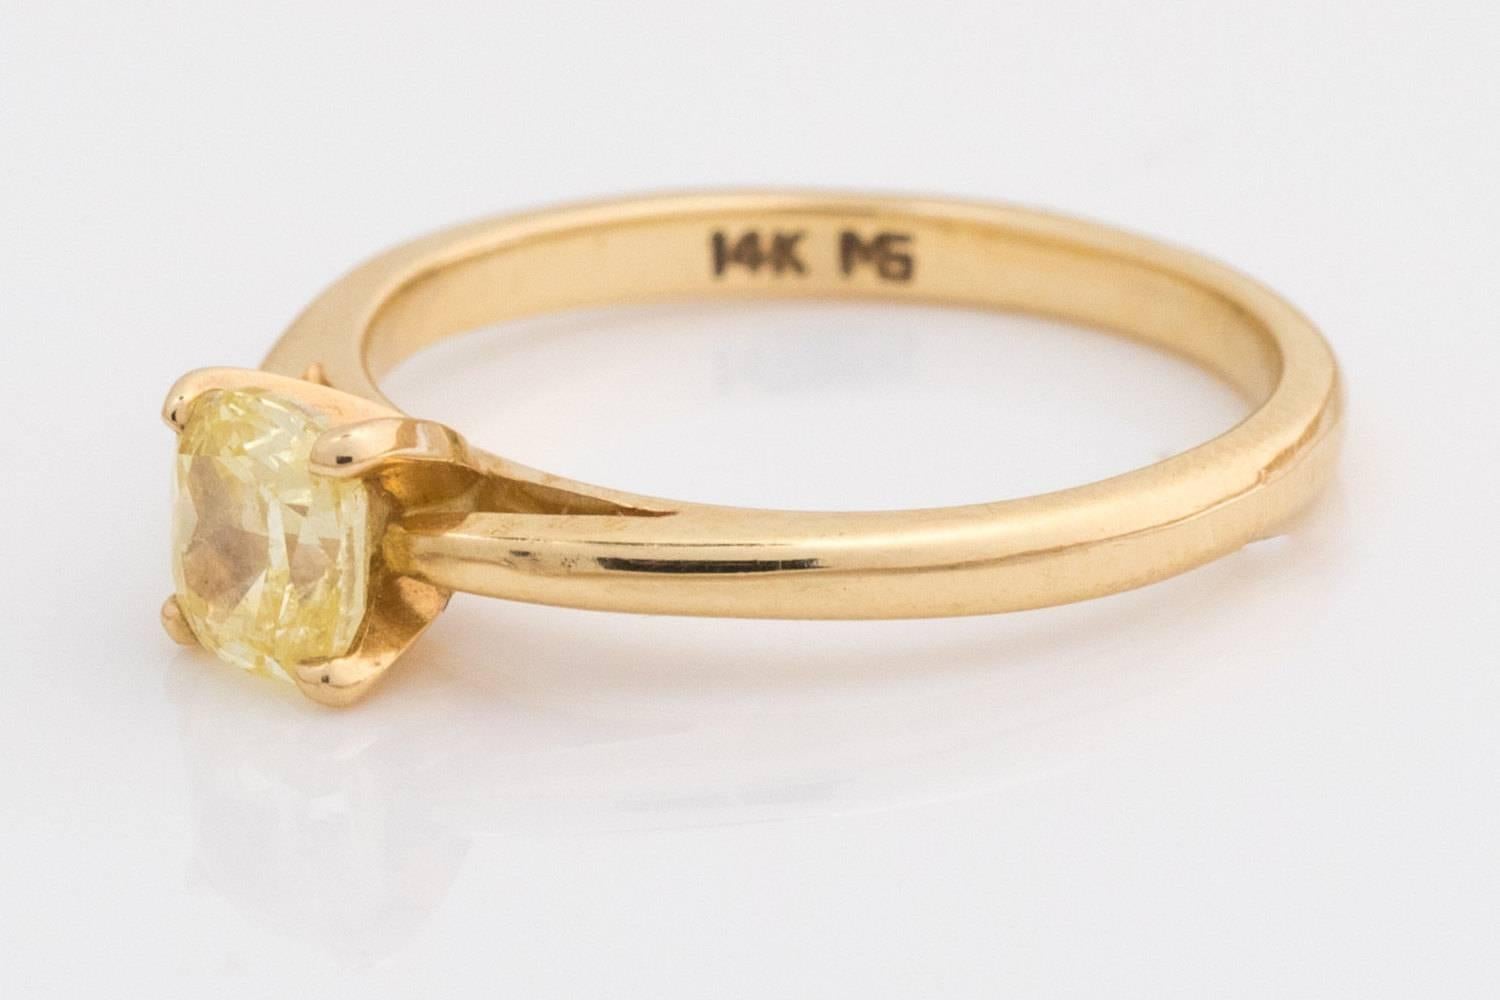 Fancy Canary Yellow Natural Diamond Engagement Ring

Metal Type: 14 karat Yellow Gold
Ring Size: 4.5 (resizable 2-3 sizes up or down)
Weight: 1.8 g
Band Height: 5.5 mm

Diamond Details:
Cut: Cushion Cut
Carat Weight: .50 carat
Color: Fancy